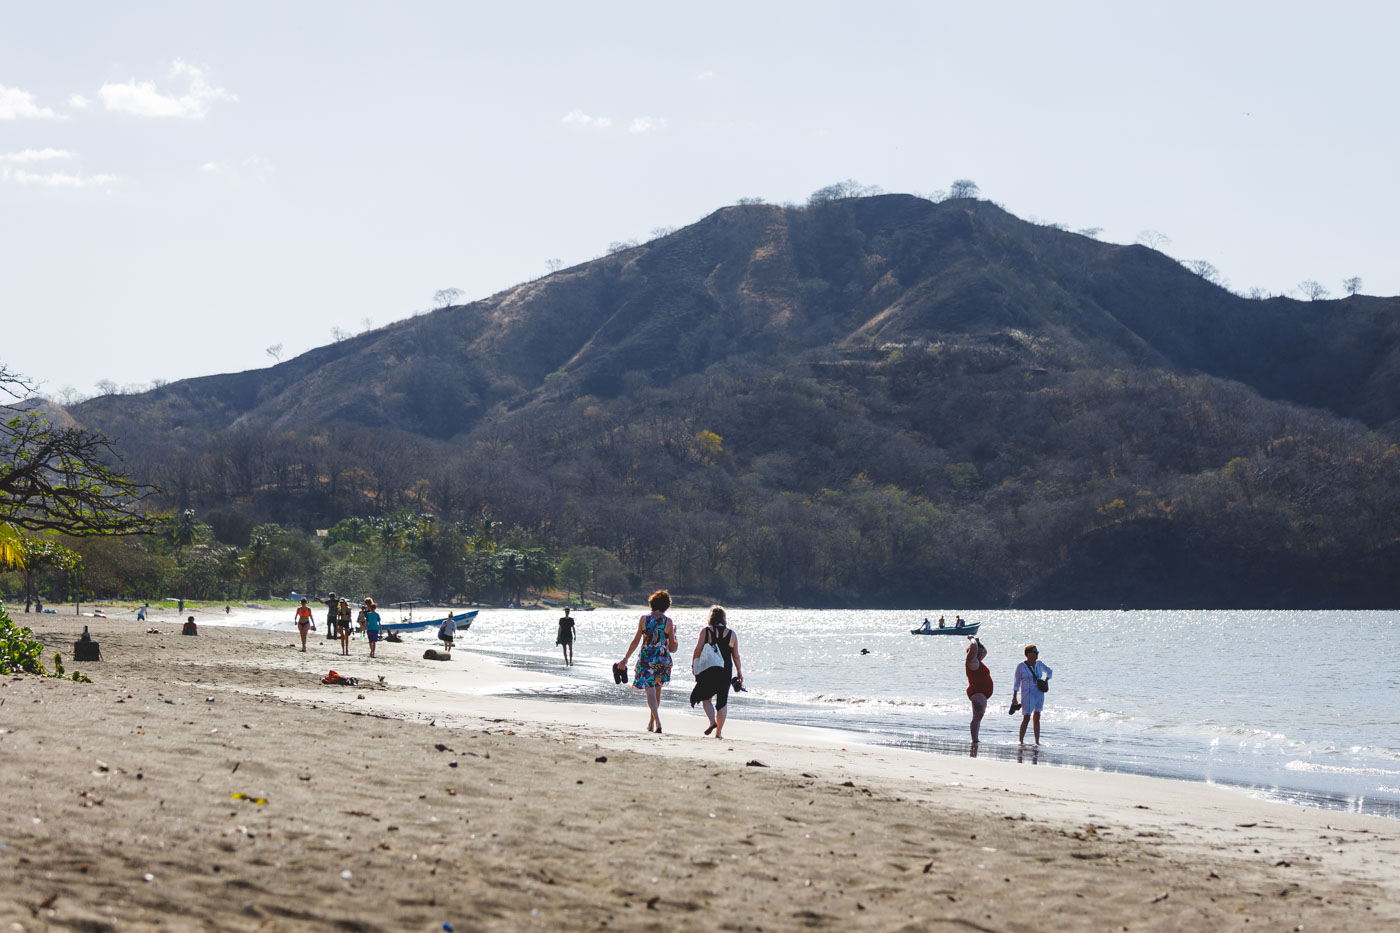 Tourists walking up and down Playa del Coco with a view of a mountain in the background.